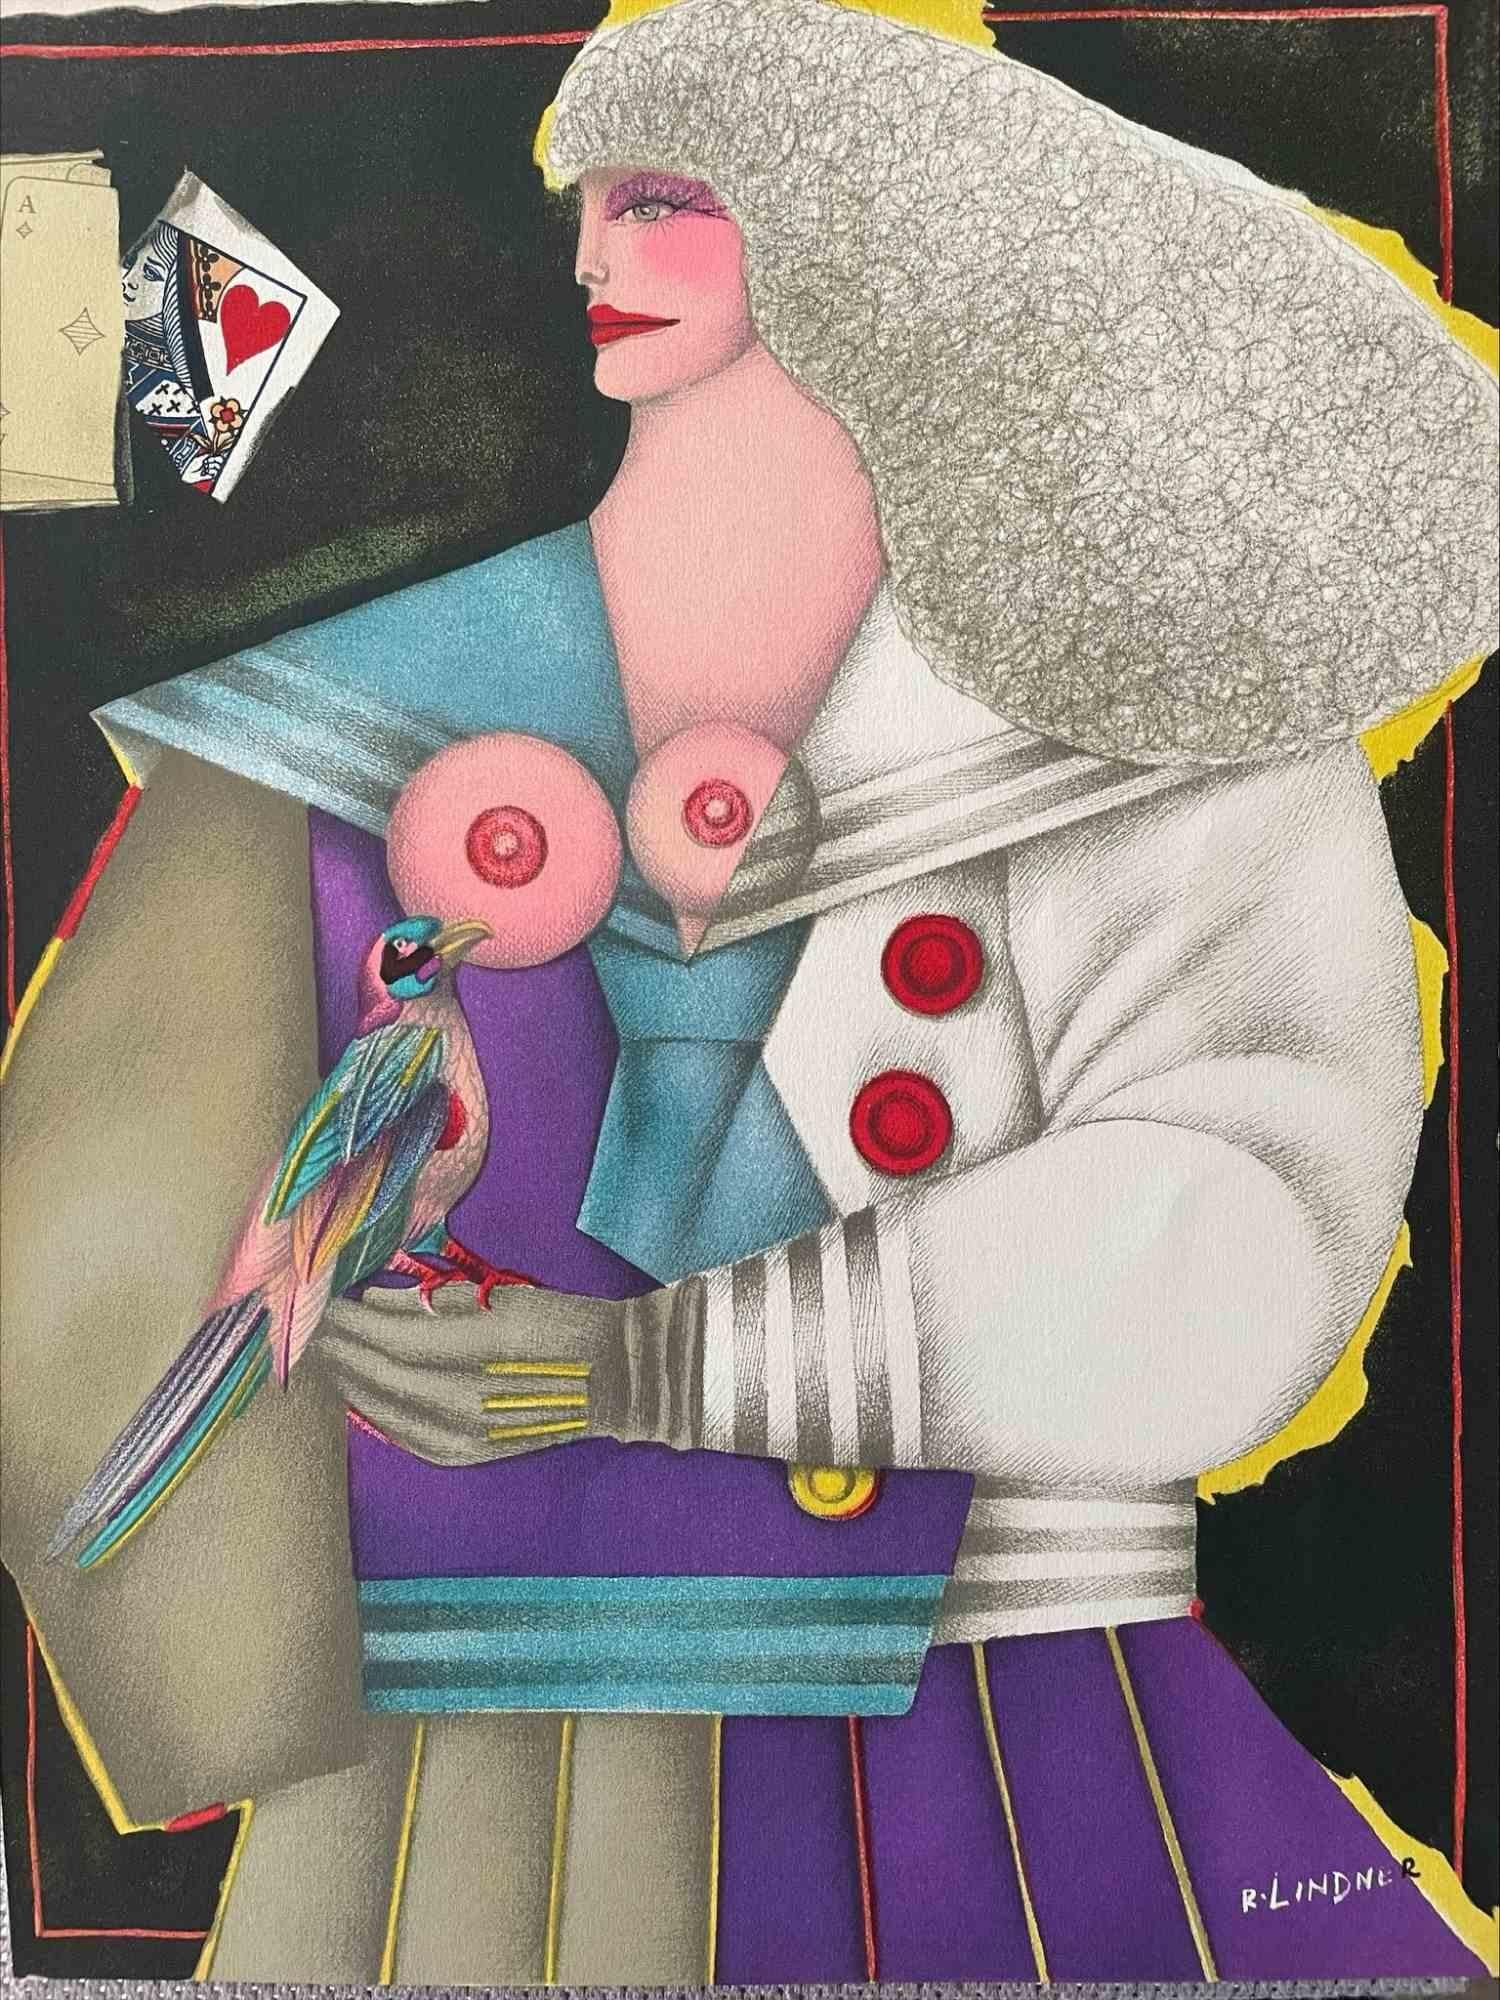 Untitled   is an artwork realized by Richard Lindner  in 1974.

Original colored lithograph.

Good conditions. Printed by Mourlot , France.

This lithograph was realized  by the artist in 1974 for éditions XXe Siècle - Le Surrealisme I - XLII -